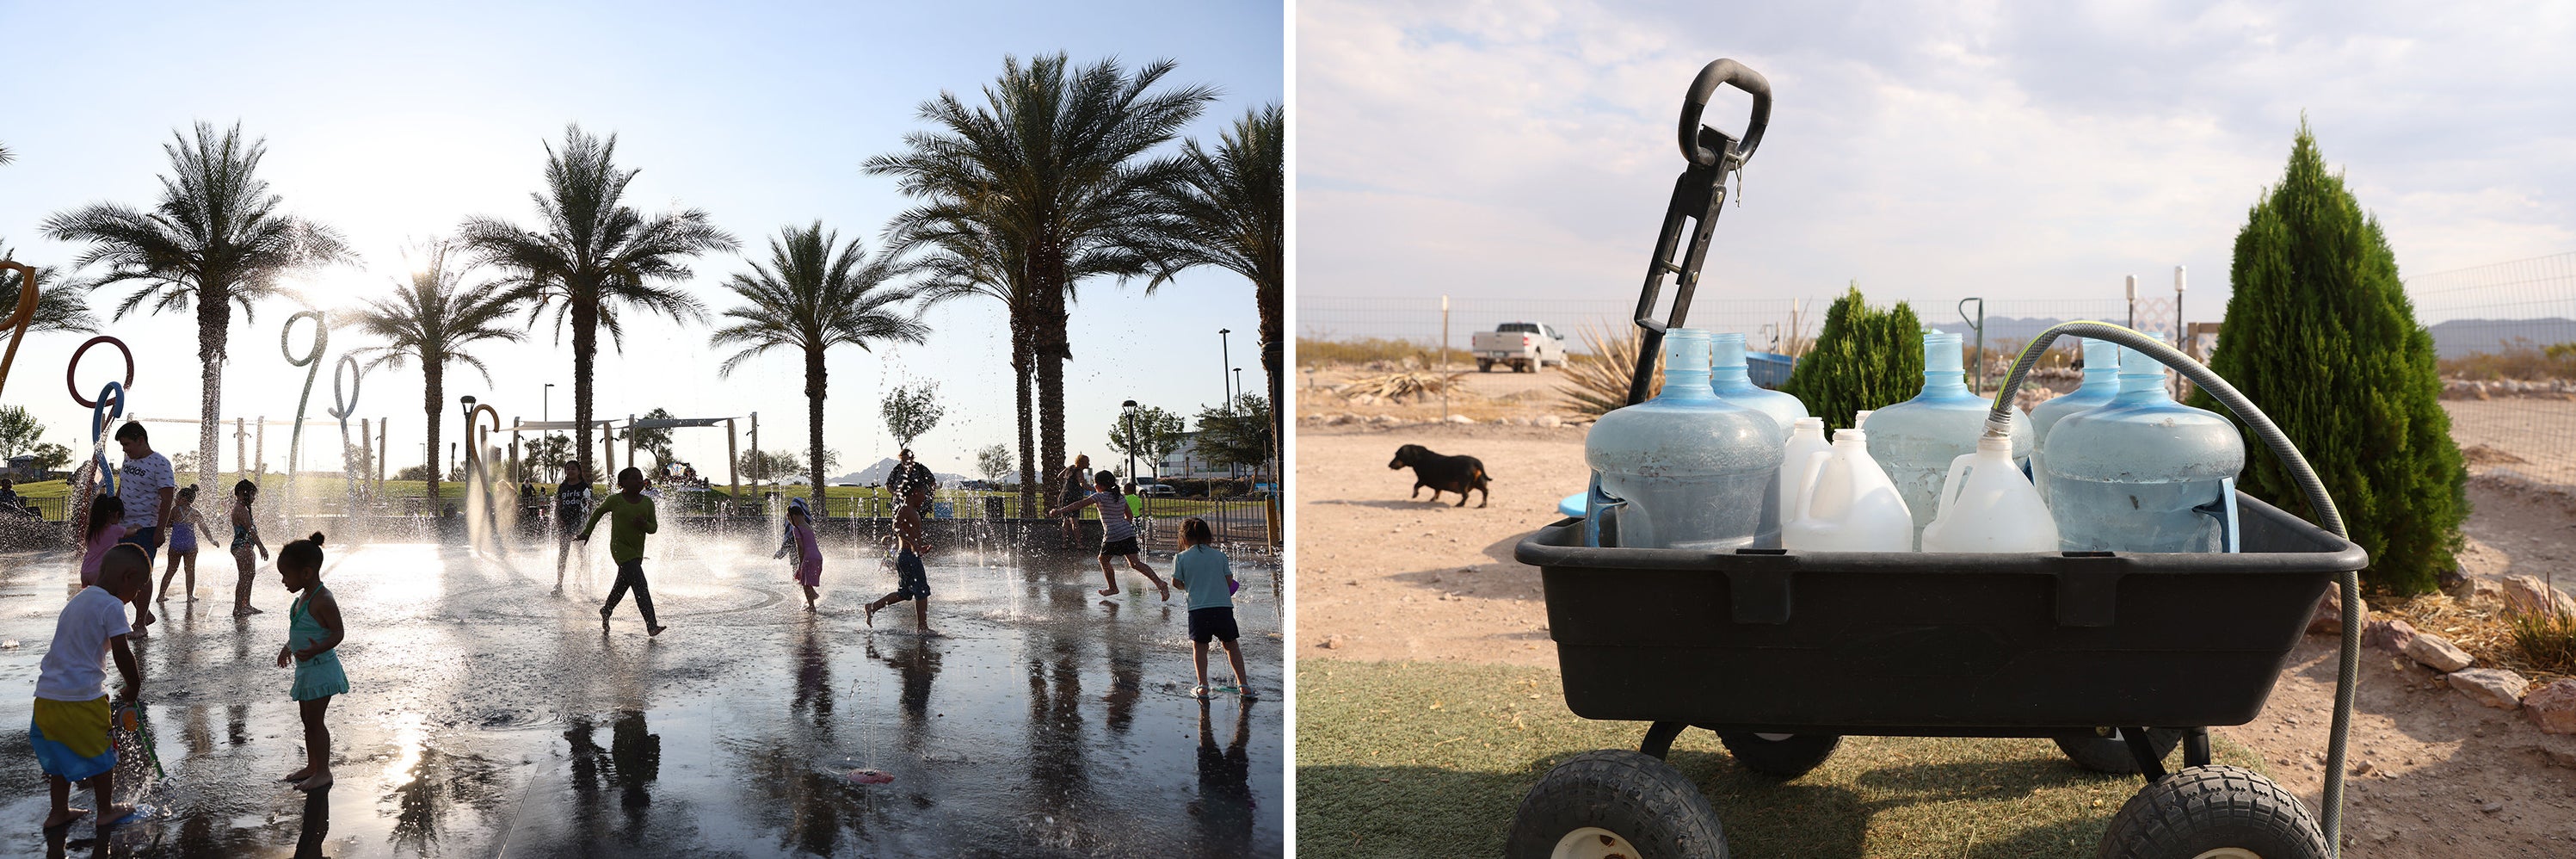 Side-by-side images show kids playing in a water park and water jugs sitting in a wagon 